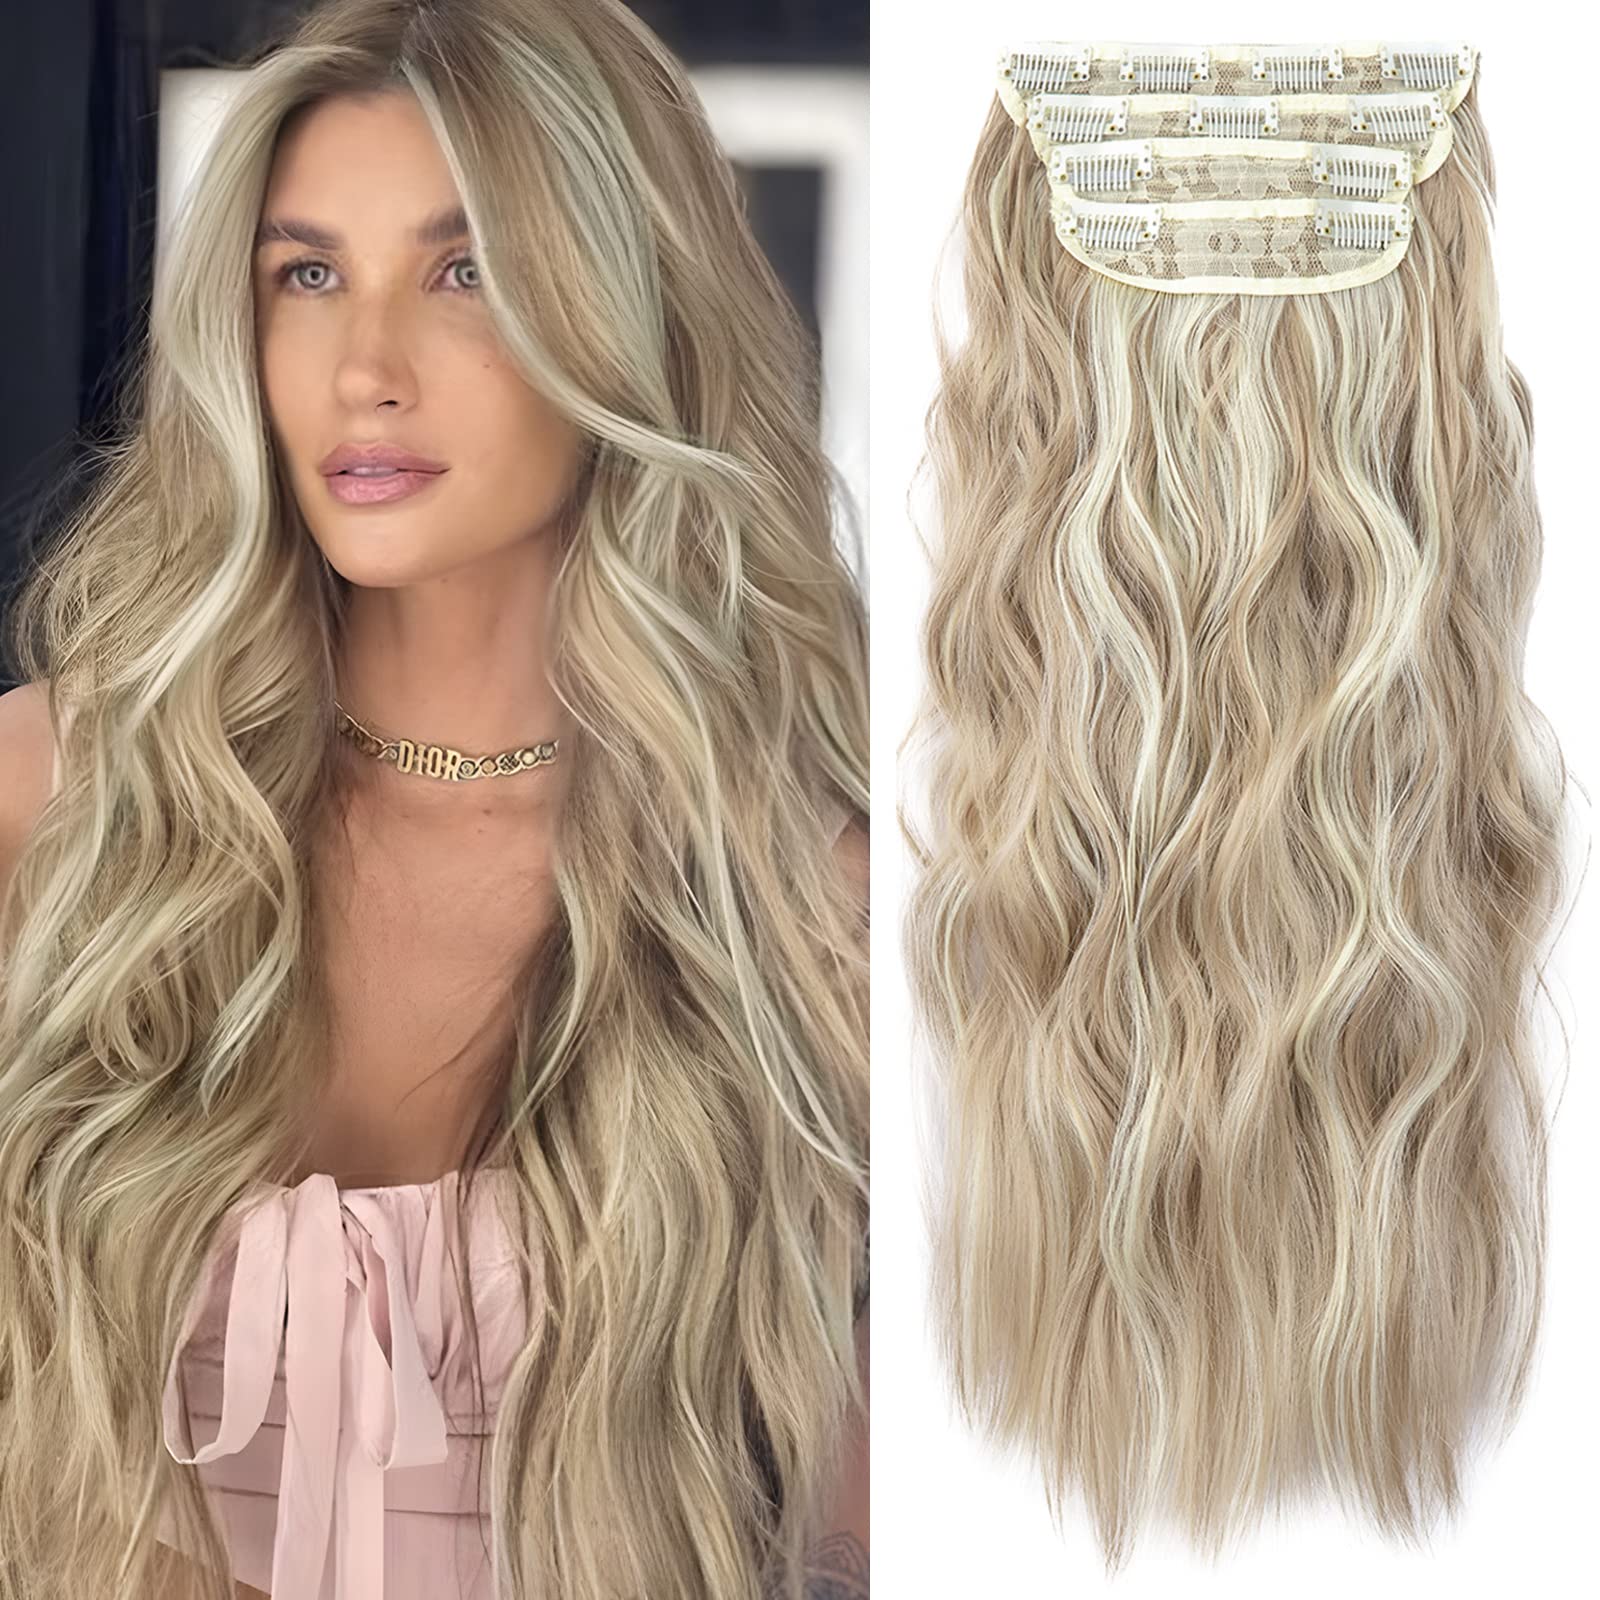 LEEONS Clip in Natural Hair Extensions